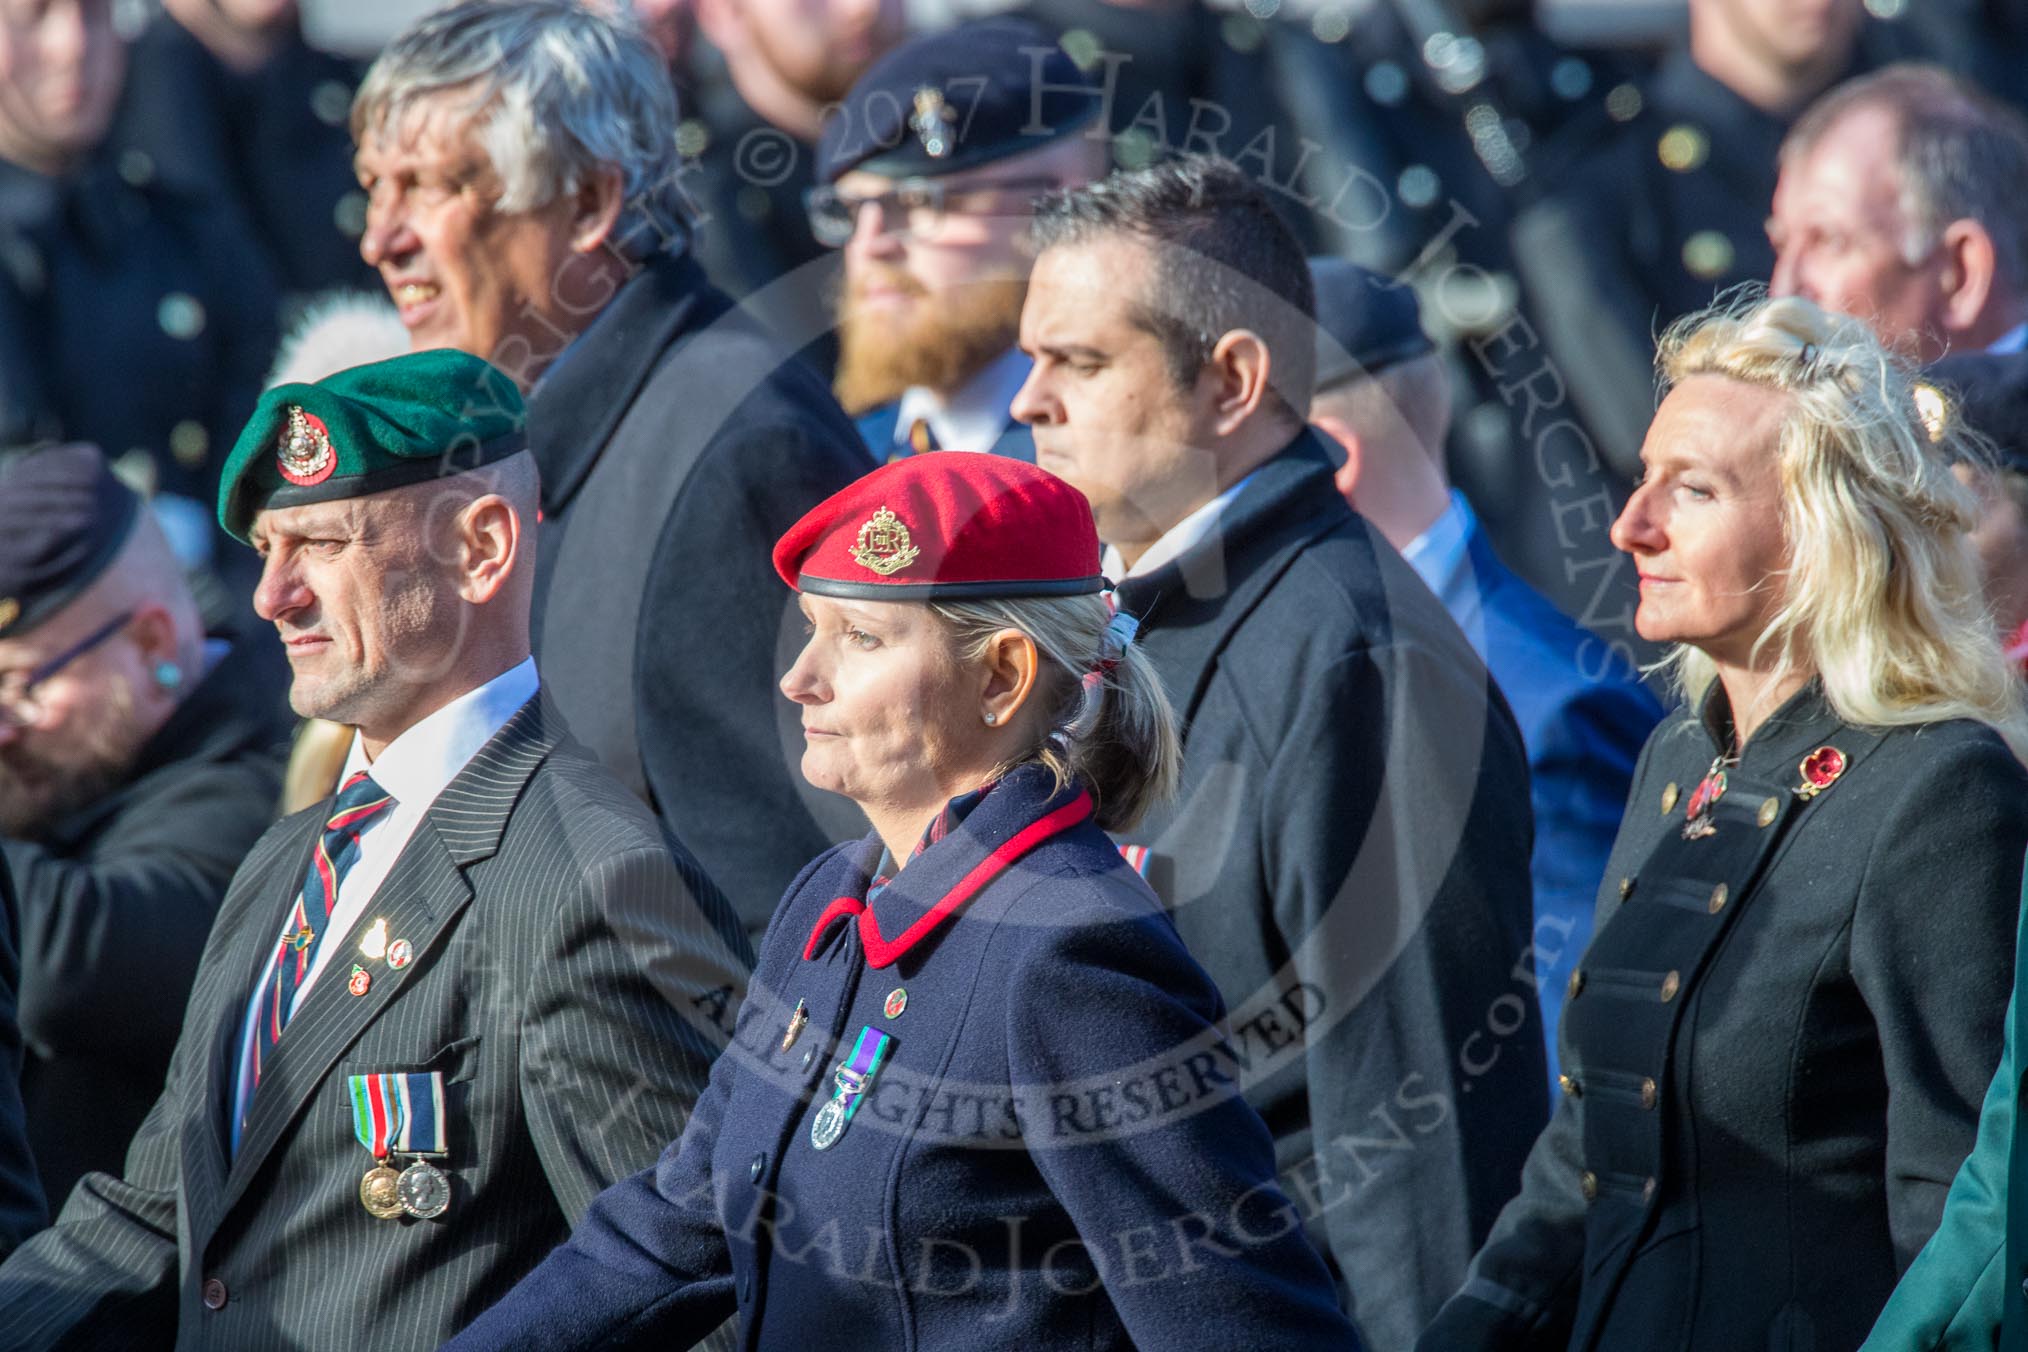 The Not Forgotten Association  (Group F5, 47 members) during the Royal British Legion March Past on Remembrance Sunday at the Cenotaph, Whitehall, Westminster, London, 11 November 2018, 11:50.